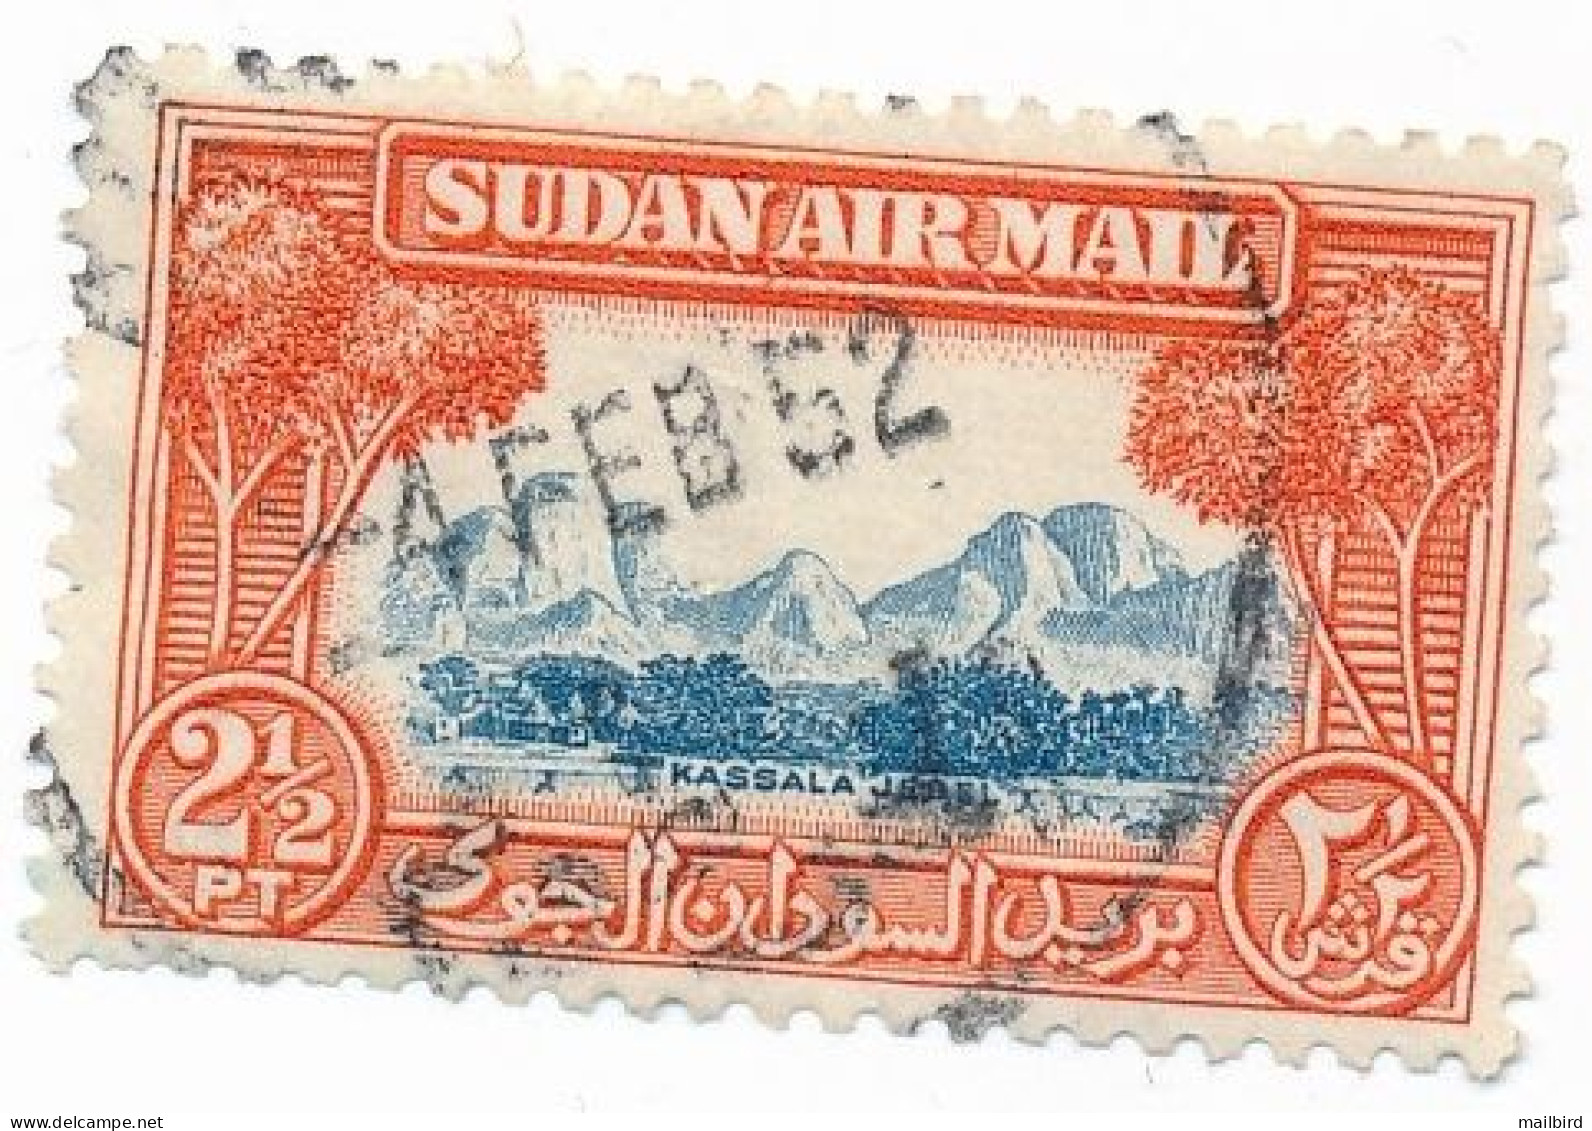 Sudan 1950 Airmail - Local Motives 2½ Pia. Rare & Collectible Stamp - USED & Stamped 4 FEB 1952 - Sudan (1954-...)